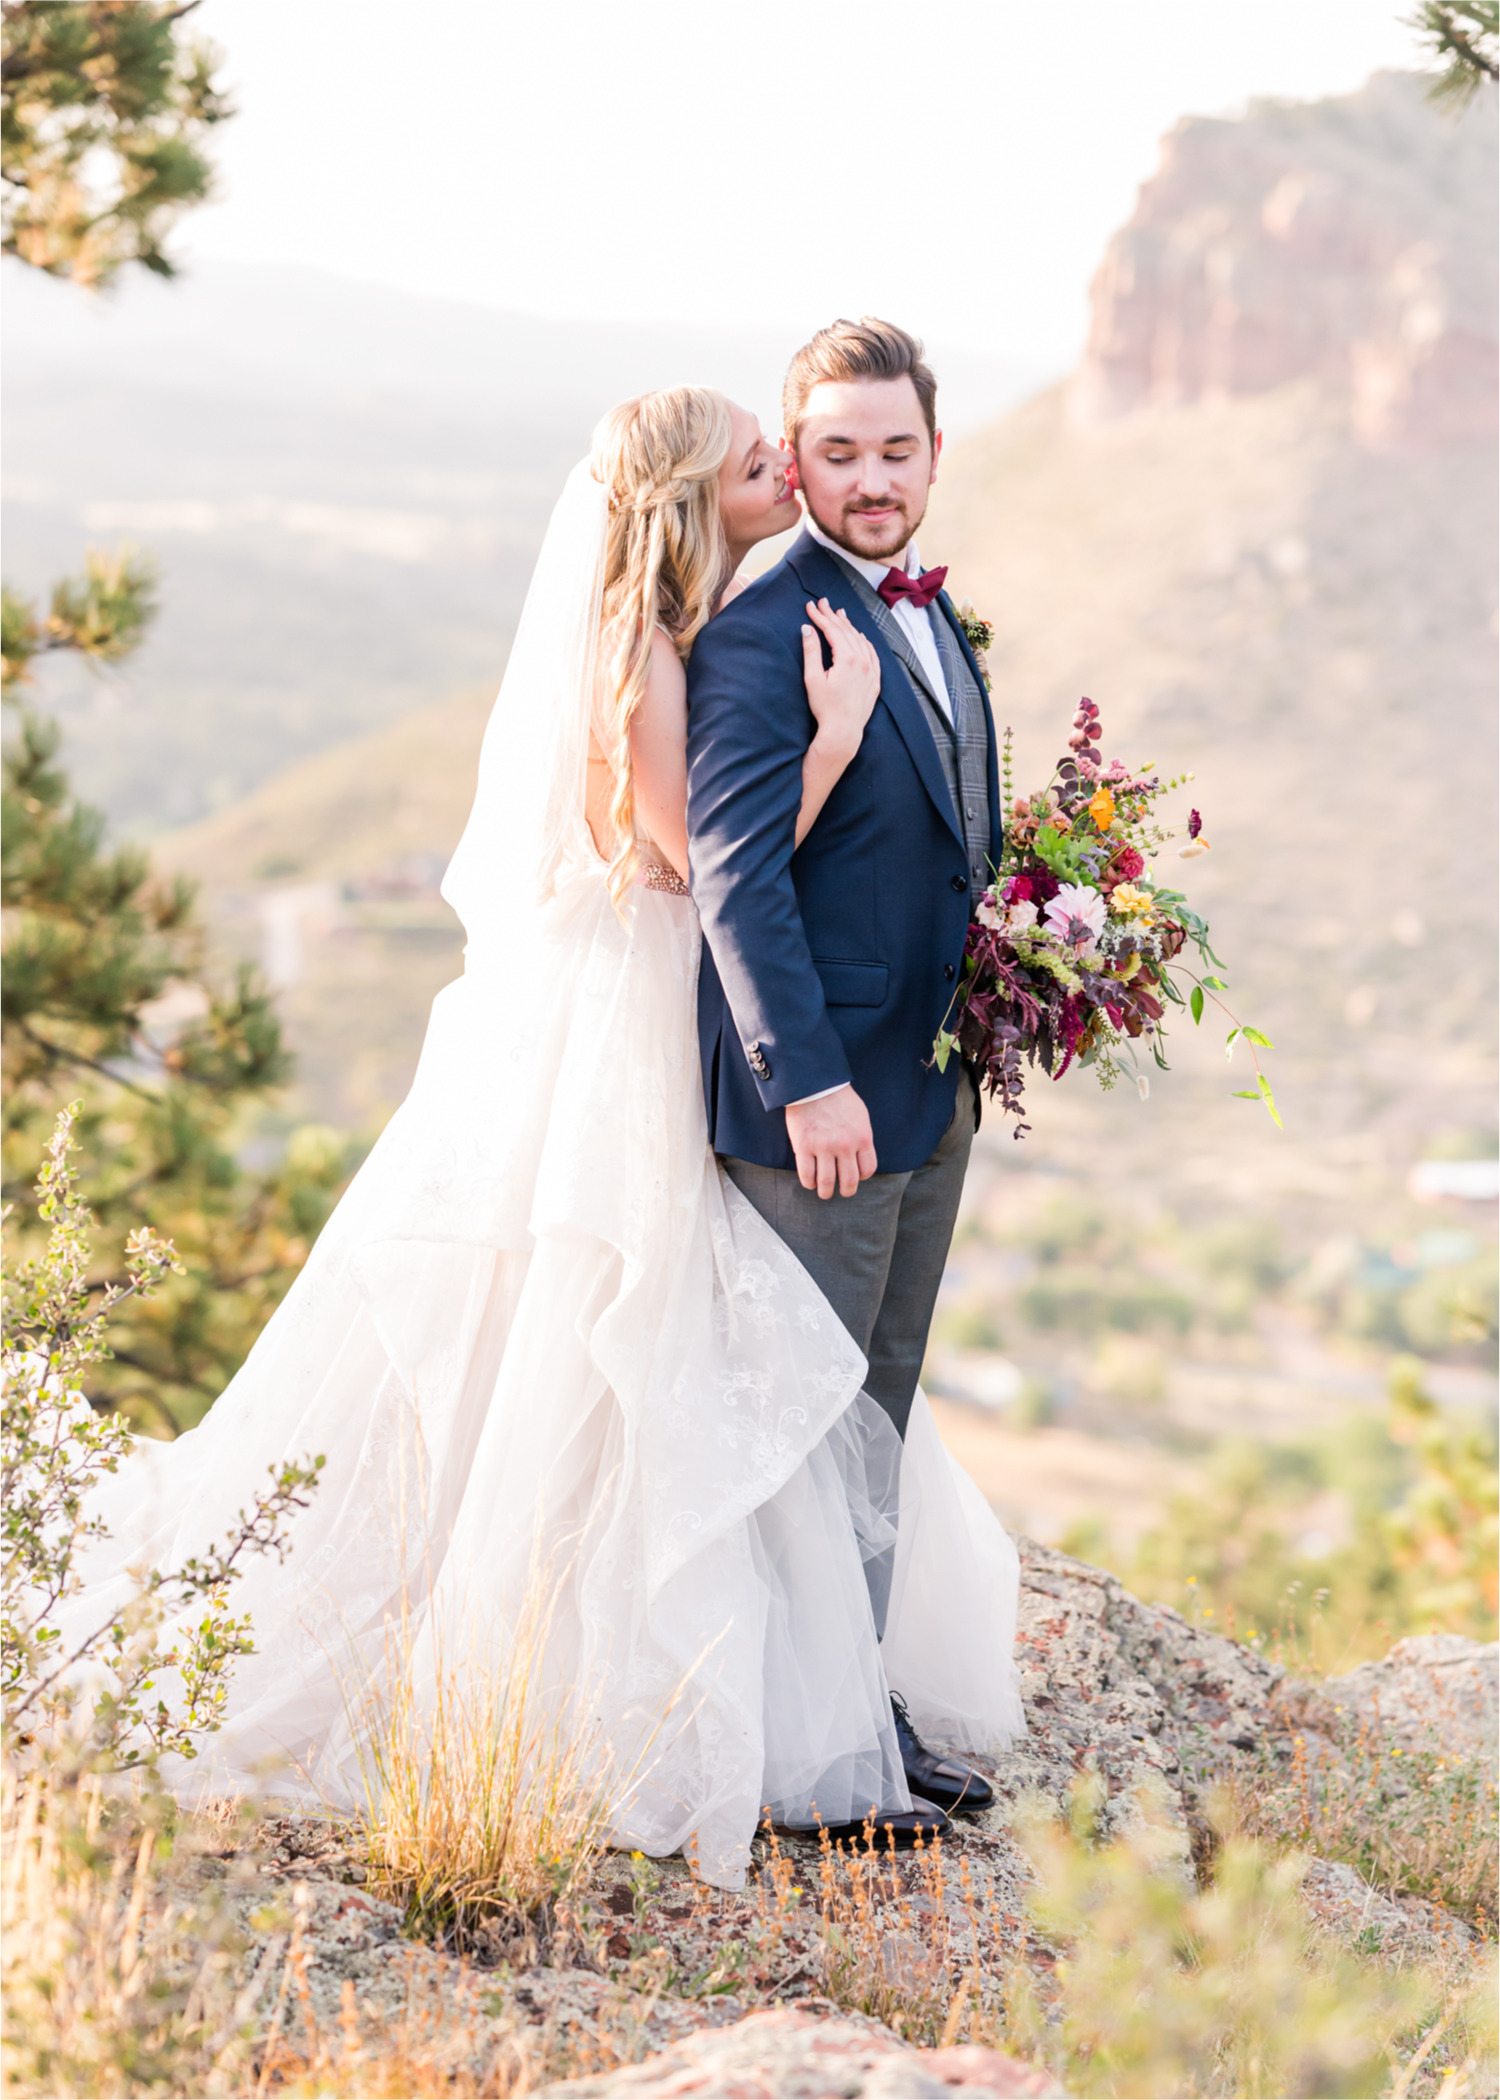 Romantic Whimsical Wedding at the Lionscrest Manor in Lyons, CO | Britni Girard Photography - Wedding Photo and Video Team | Rustic Fall Decor mixed in Burgundy, Blush, Gold and Sage | Groom in Custom Suit from Jos. a Banks | Romantic Bride and Groom Portraits in the rocky mountains | Wedding Dress from Anna Be Bridal by Hailey Paige | Hair and Makeup by Glam 5280 Chaundra Revier | Florals by Aflorae | Fine Art Wedding Photography